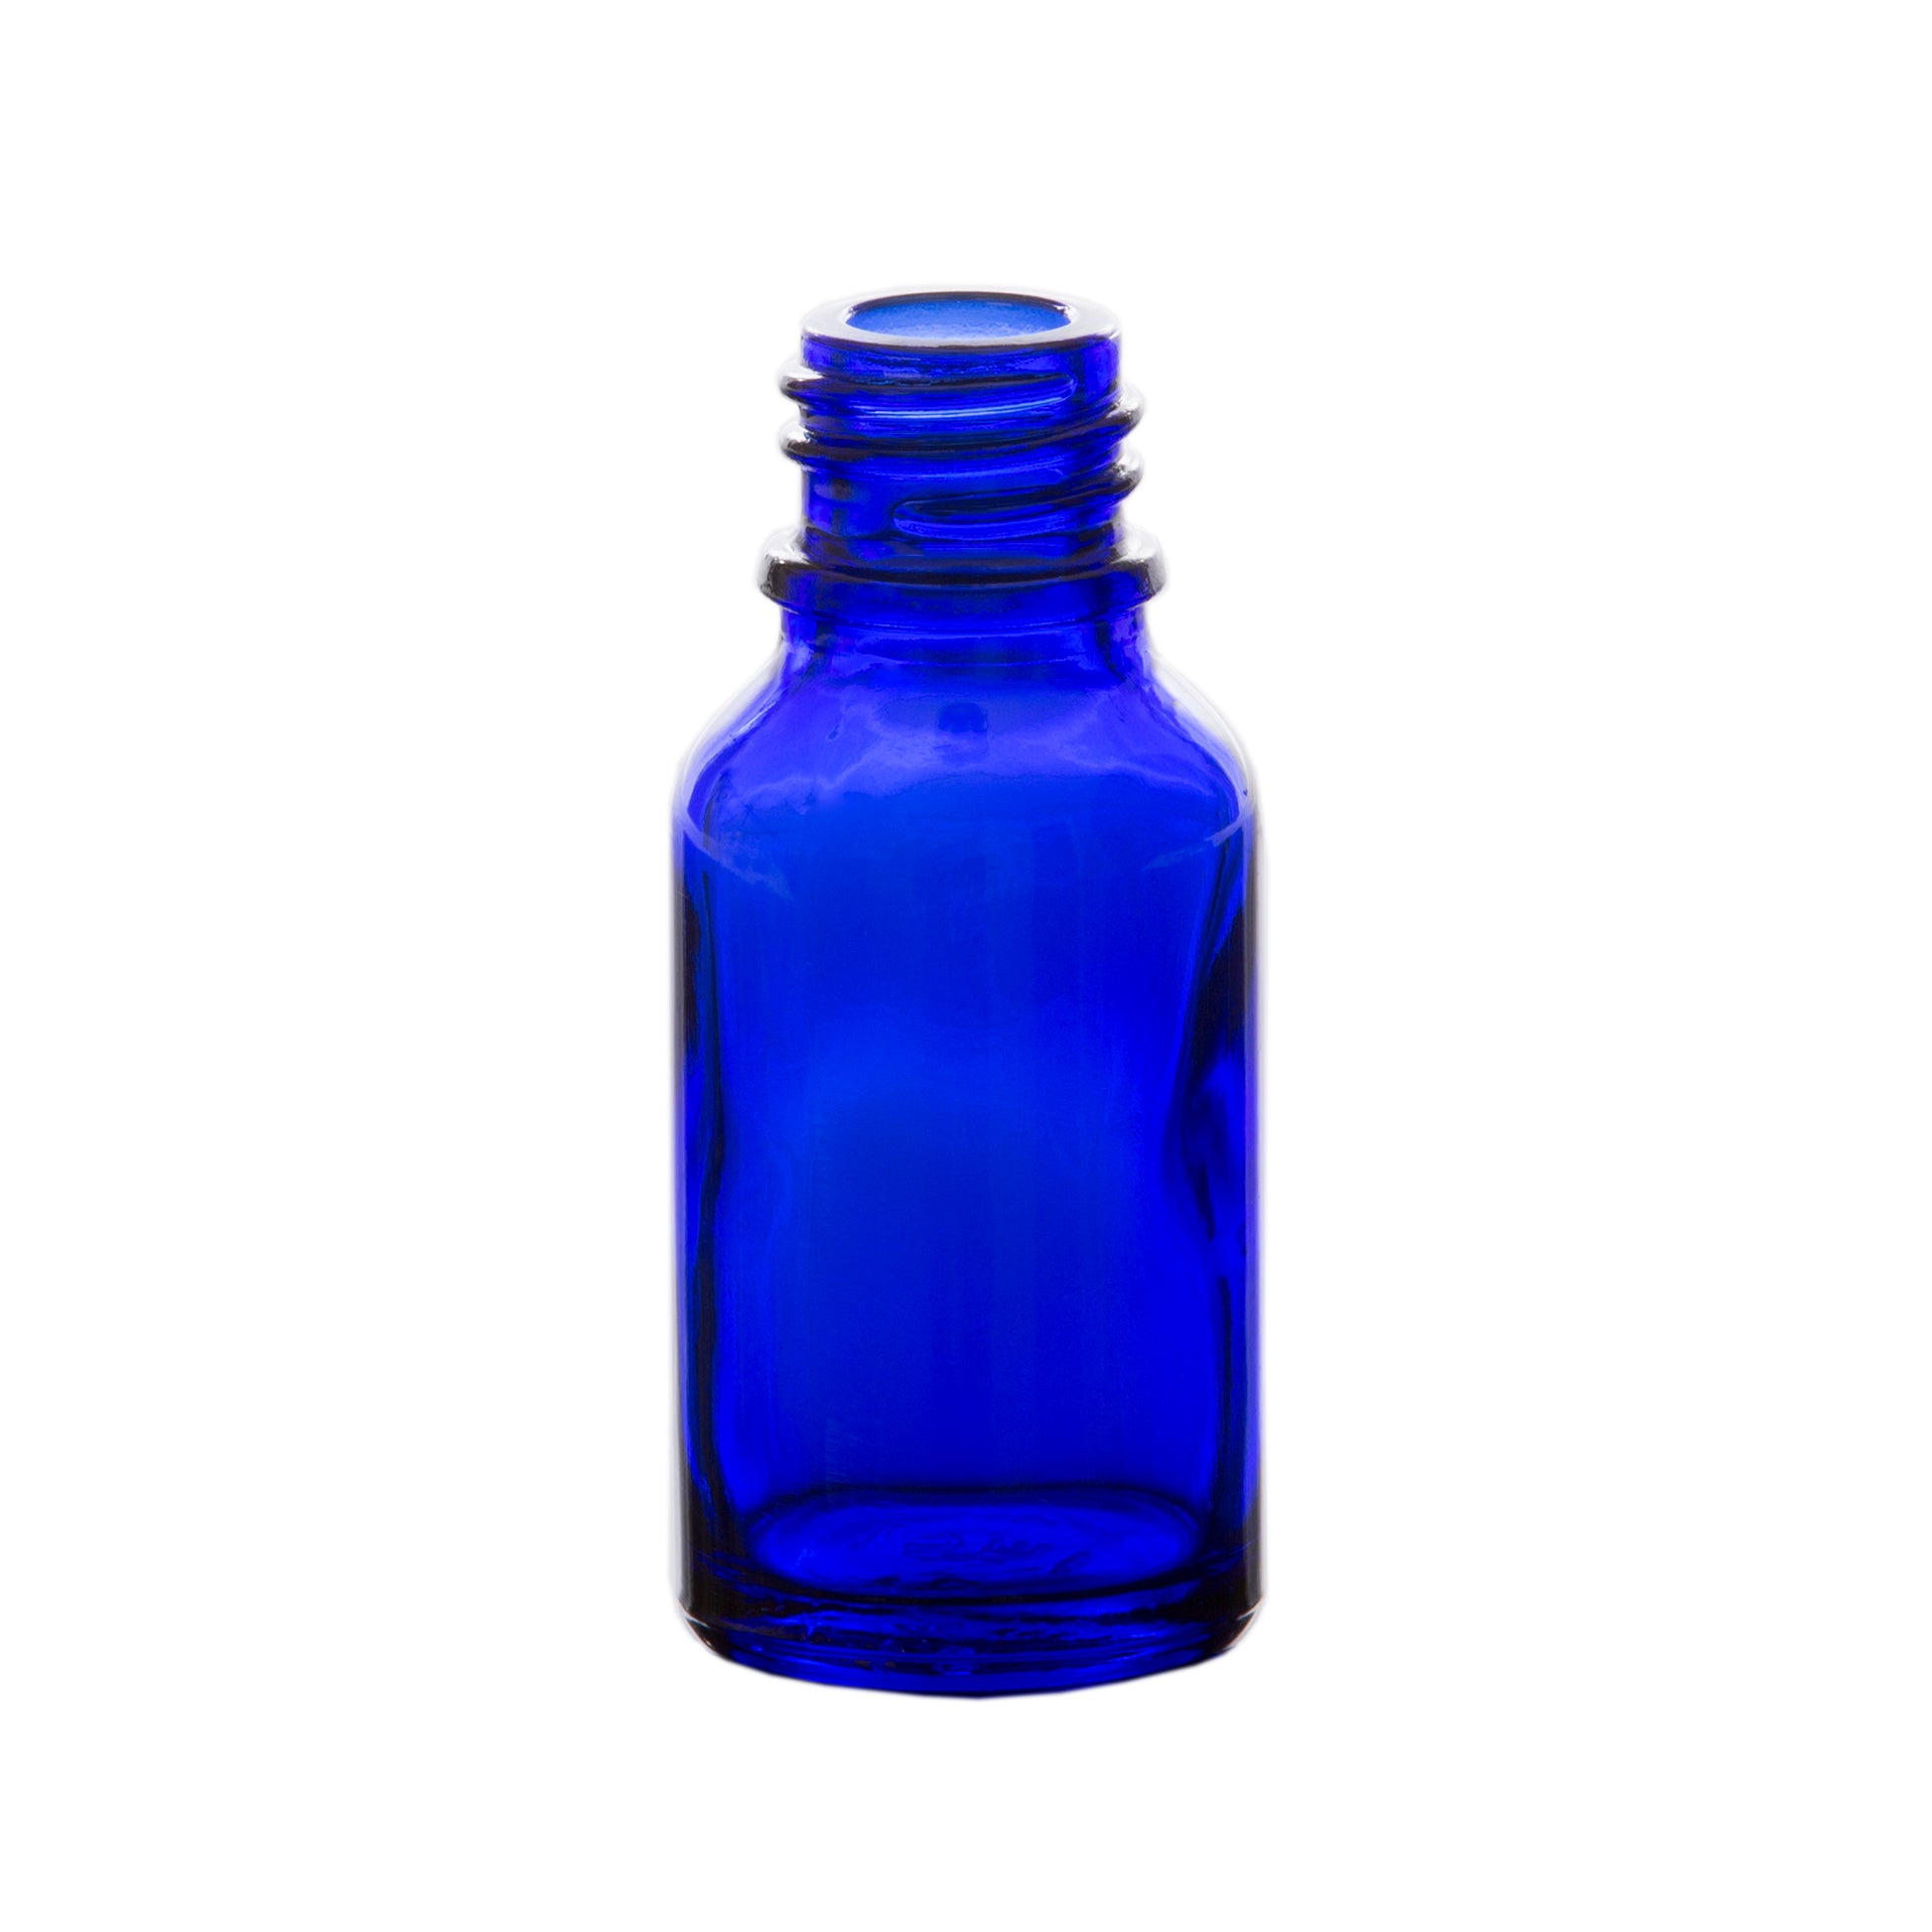 15 ml Blue Glass Essential Oil Bottle without Closure